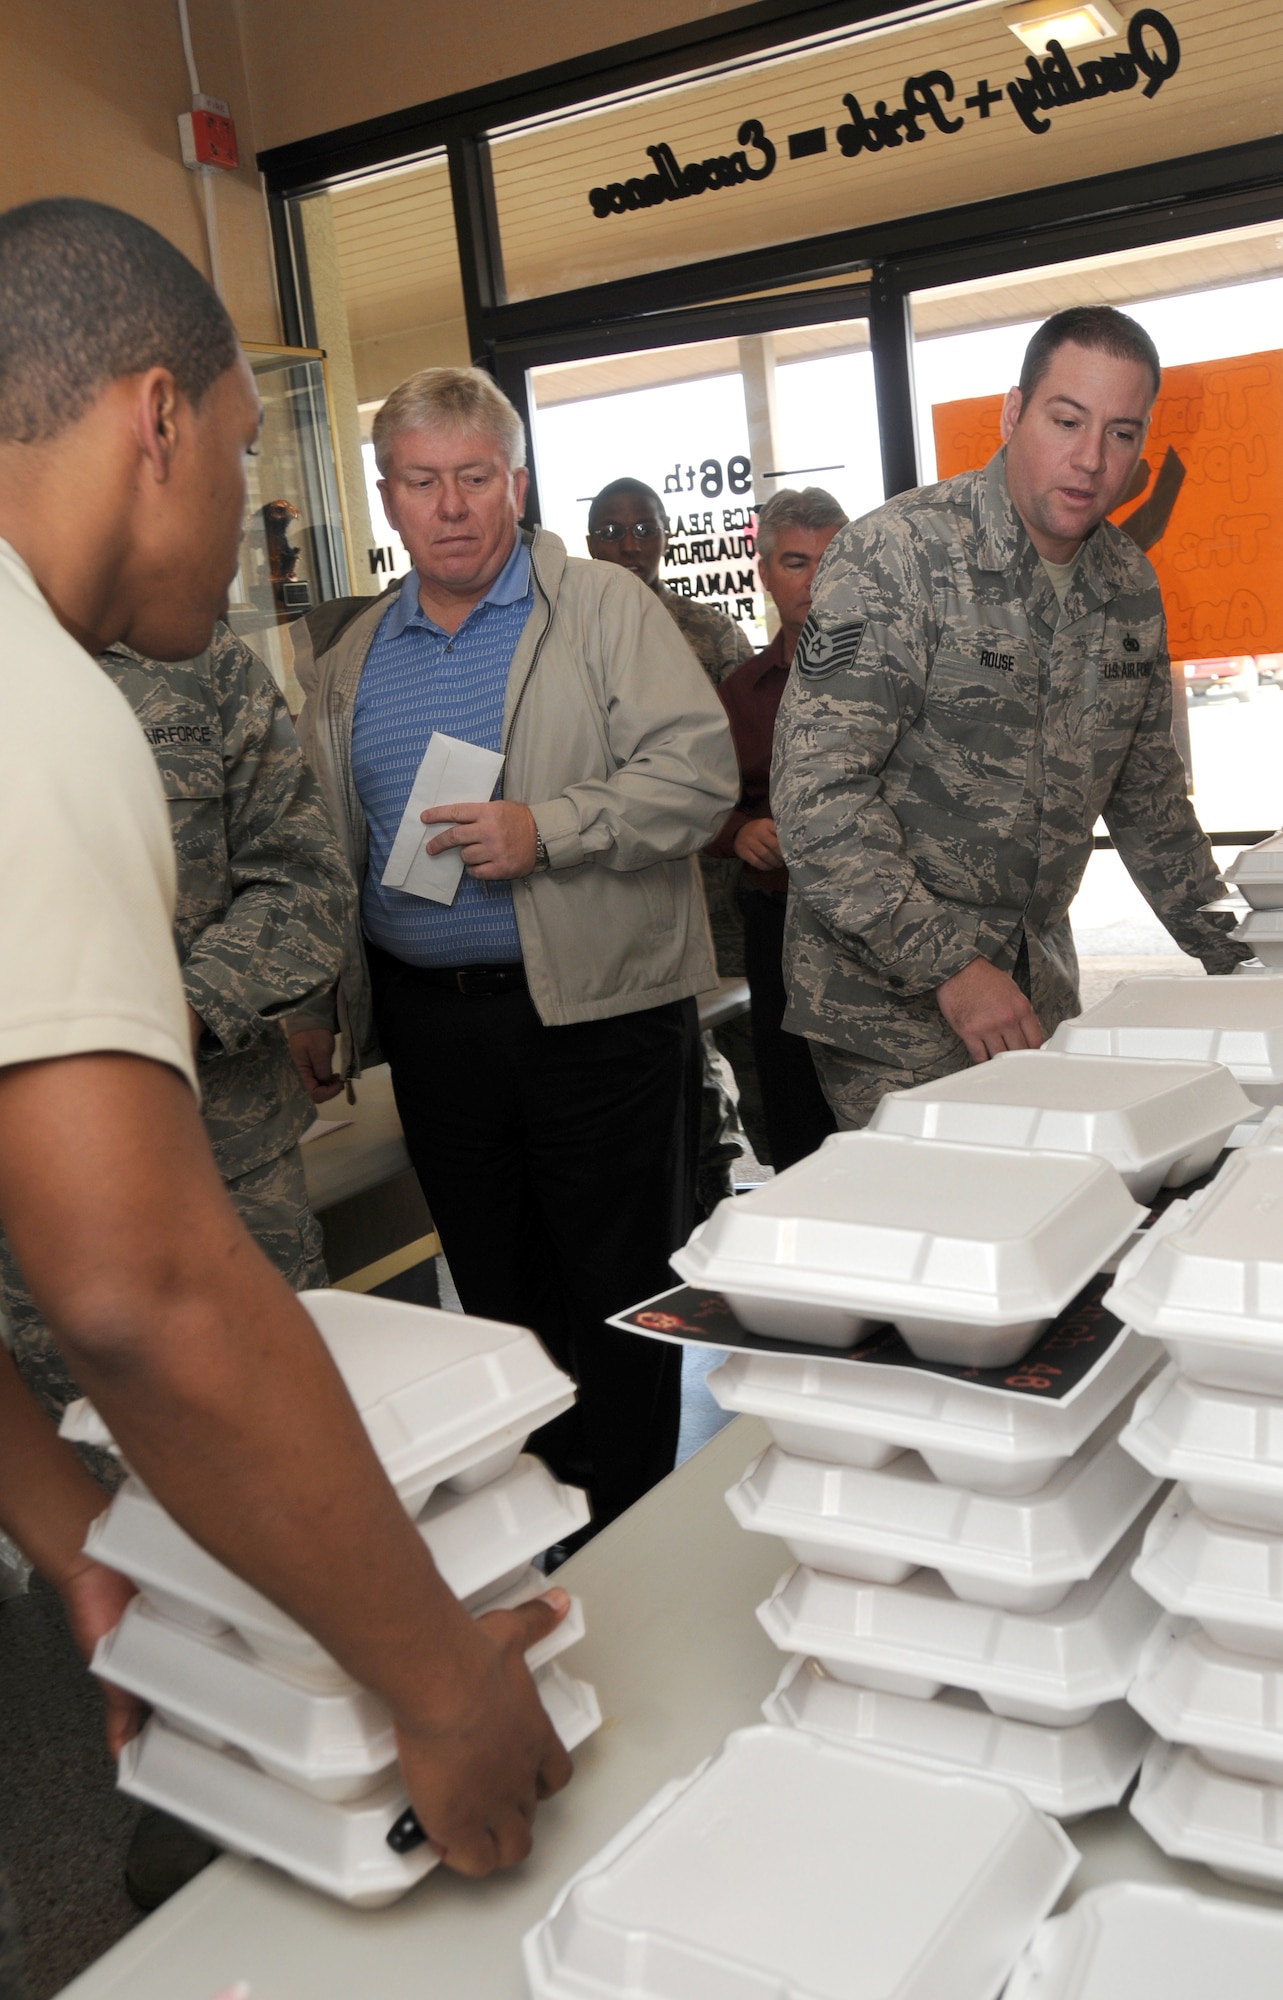 Tech. Sgt. Brent Rouse, 96th Logistics Readiness Squadron, helps carry out orders of pulled pork sandwiches for a fundraiser to raise monies for fellow a Airman. The proceeds raised will help offset additional costs the family is incurring while Tech. Sgt. Olafsen undergoes treatment to for leukemia at Sacred Heart Hospital in Pensacola, Fla. The  (U.S. Air Force photo/ Staff Sgt. Stacia Zachary)